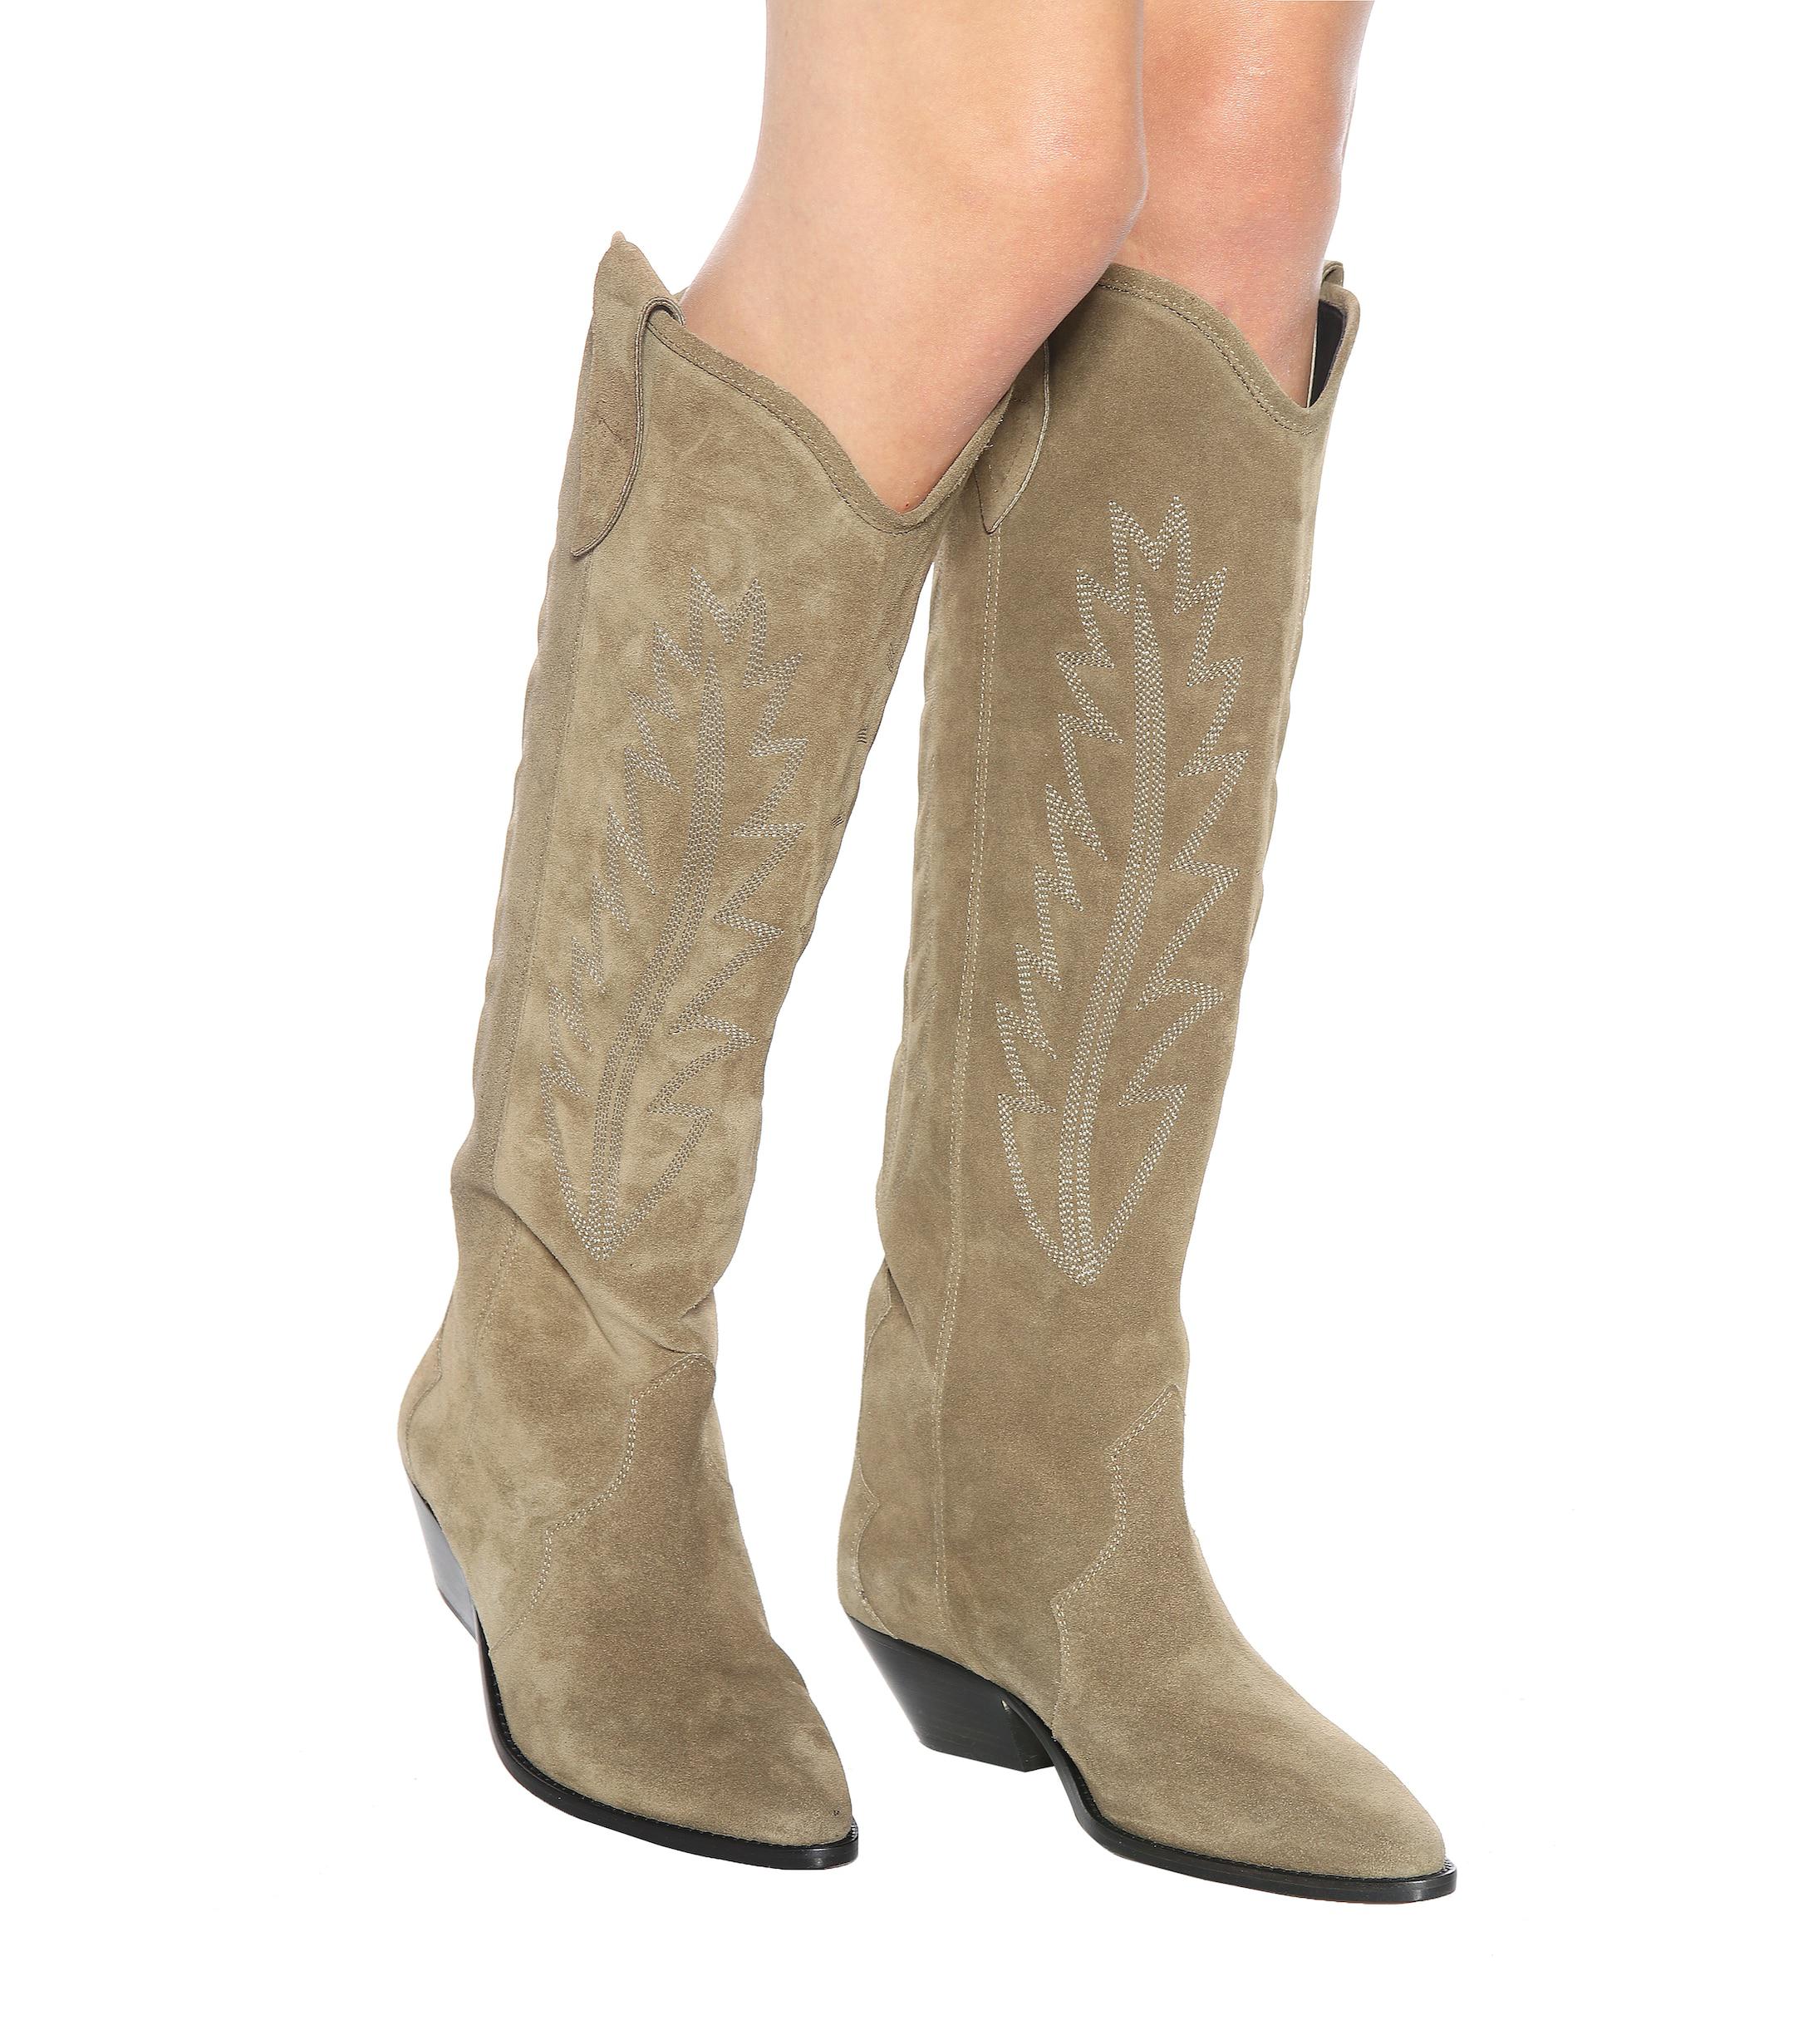 isabel marant denzy suede cowboy boots